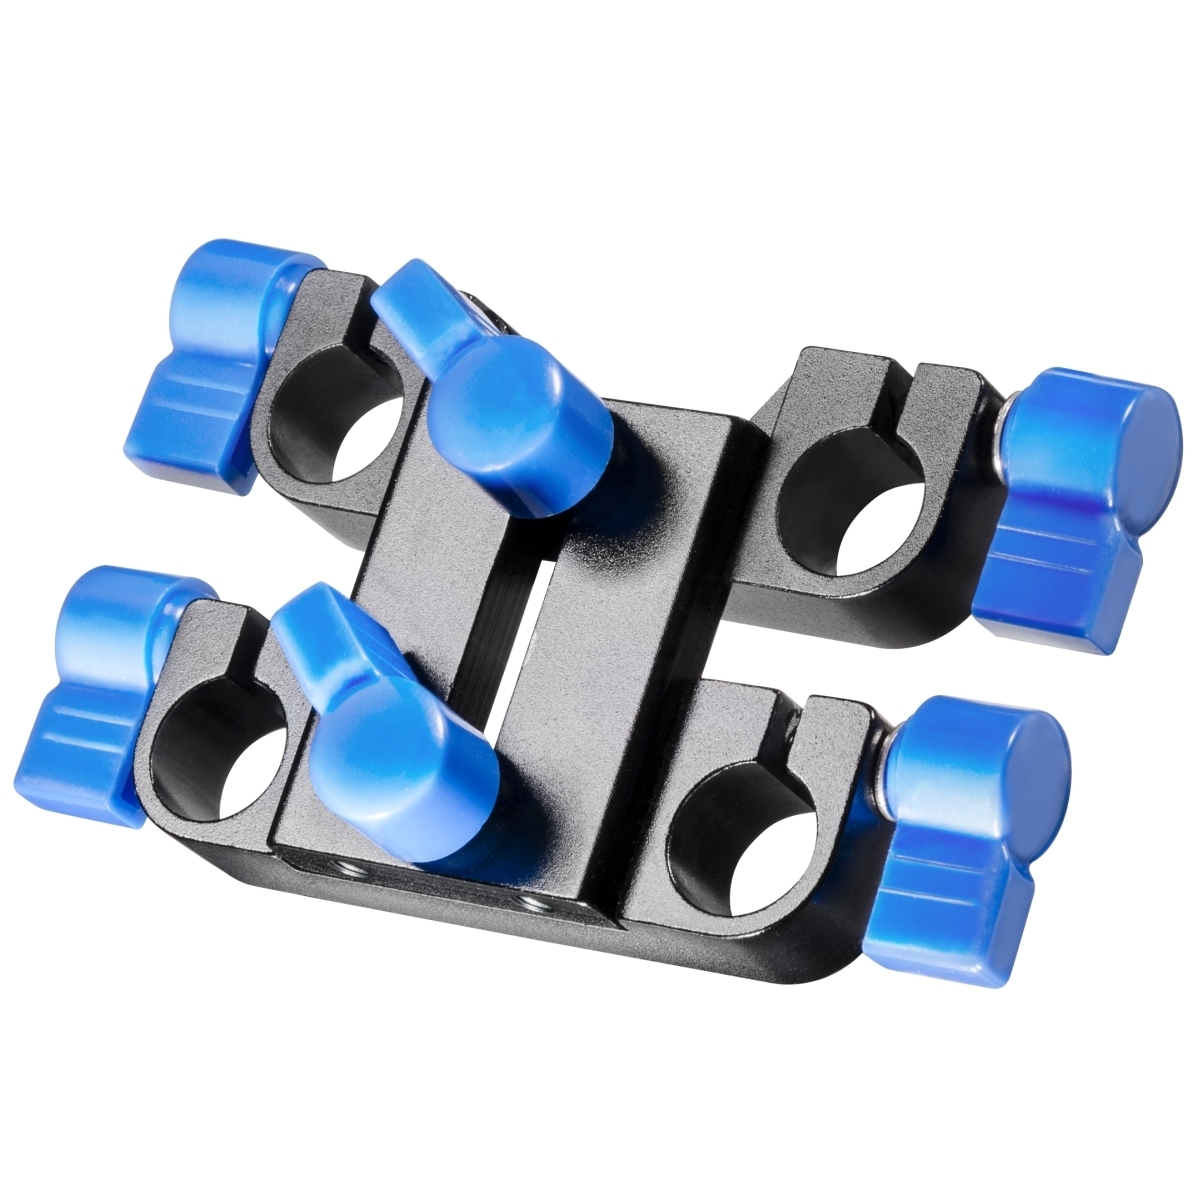 Walimex pro 15 mm Double Clamping Block